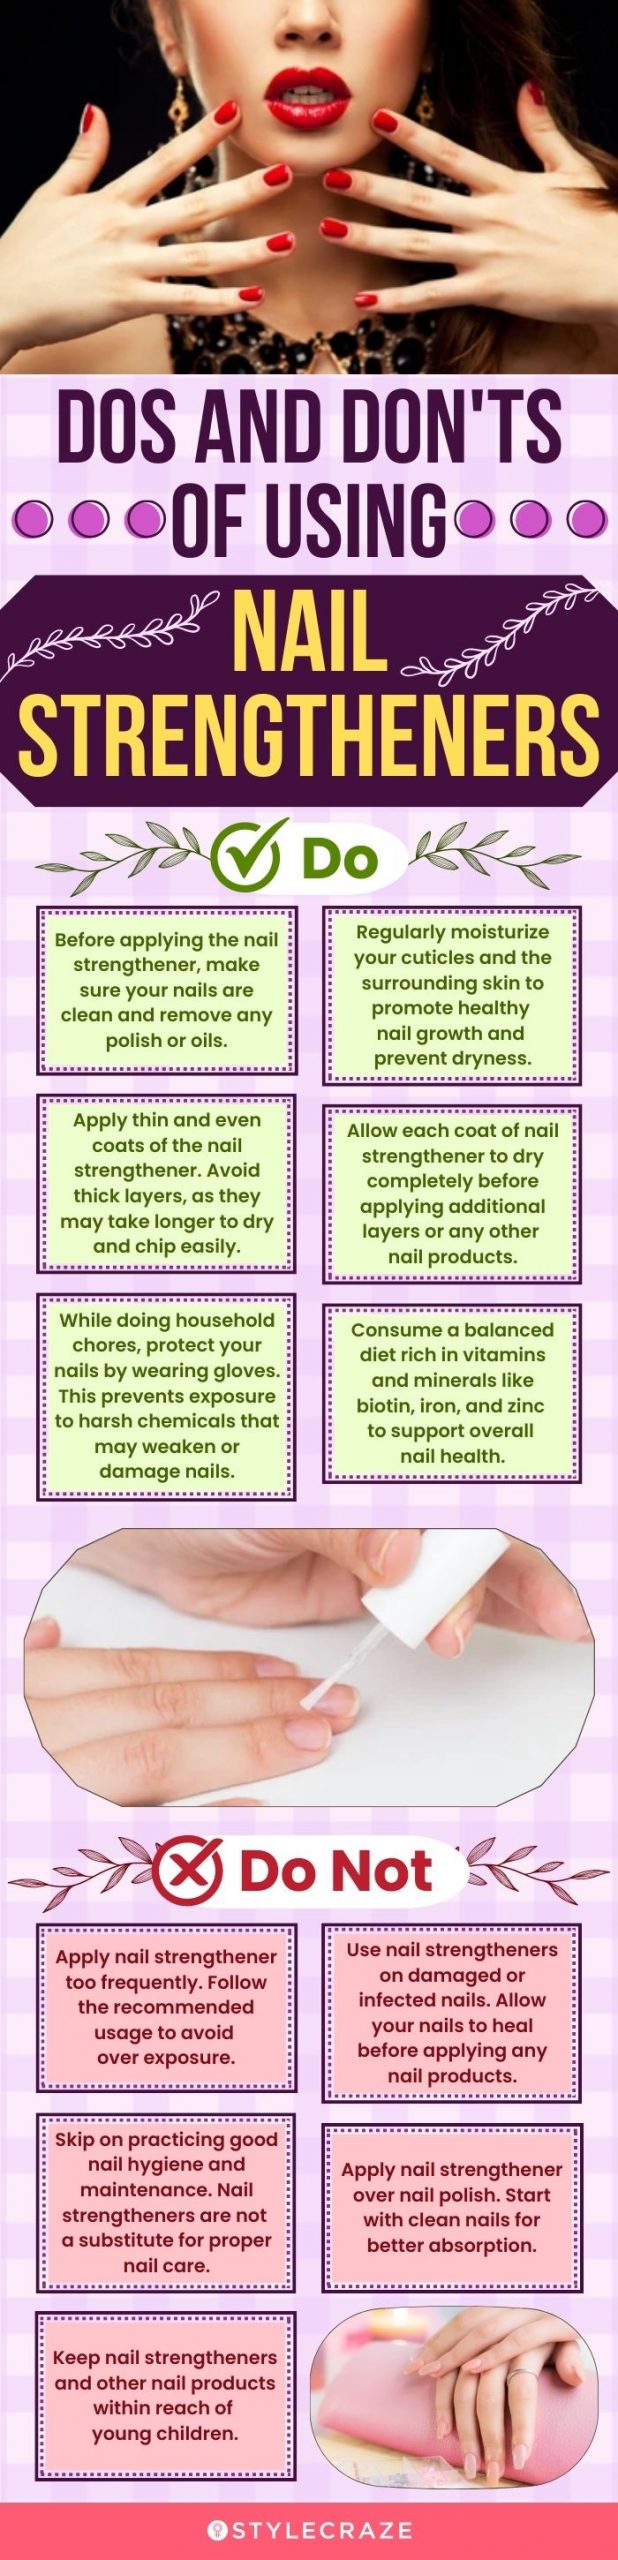 Dos And Don'ts Of Using Nail Strengtheners (infographic)